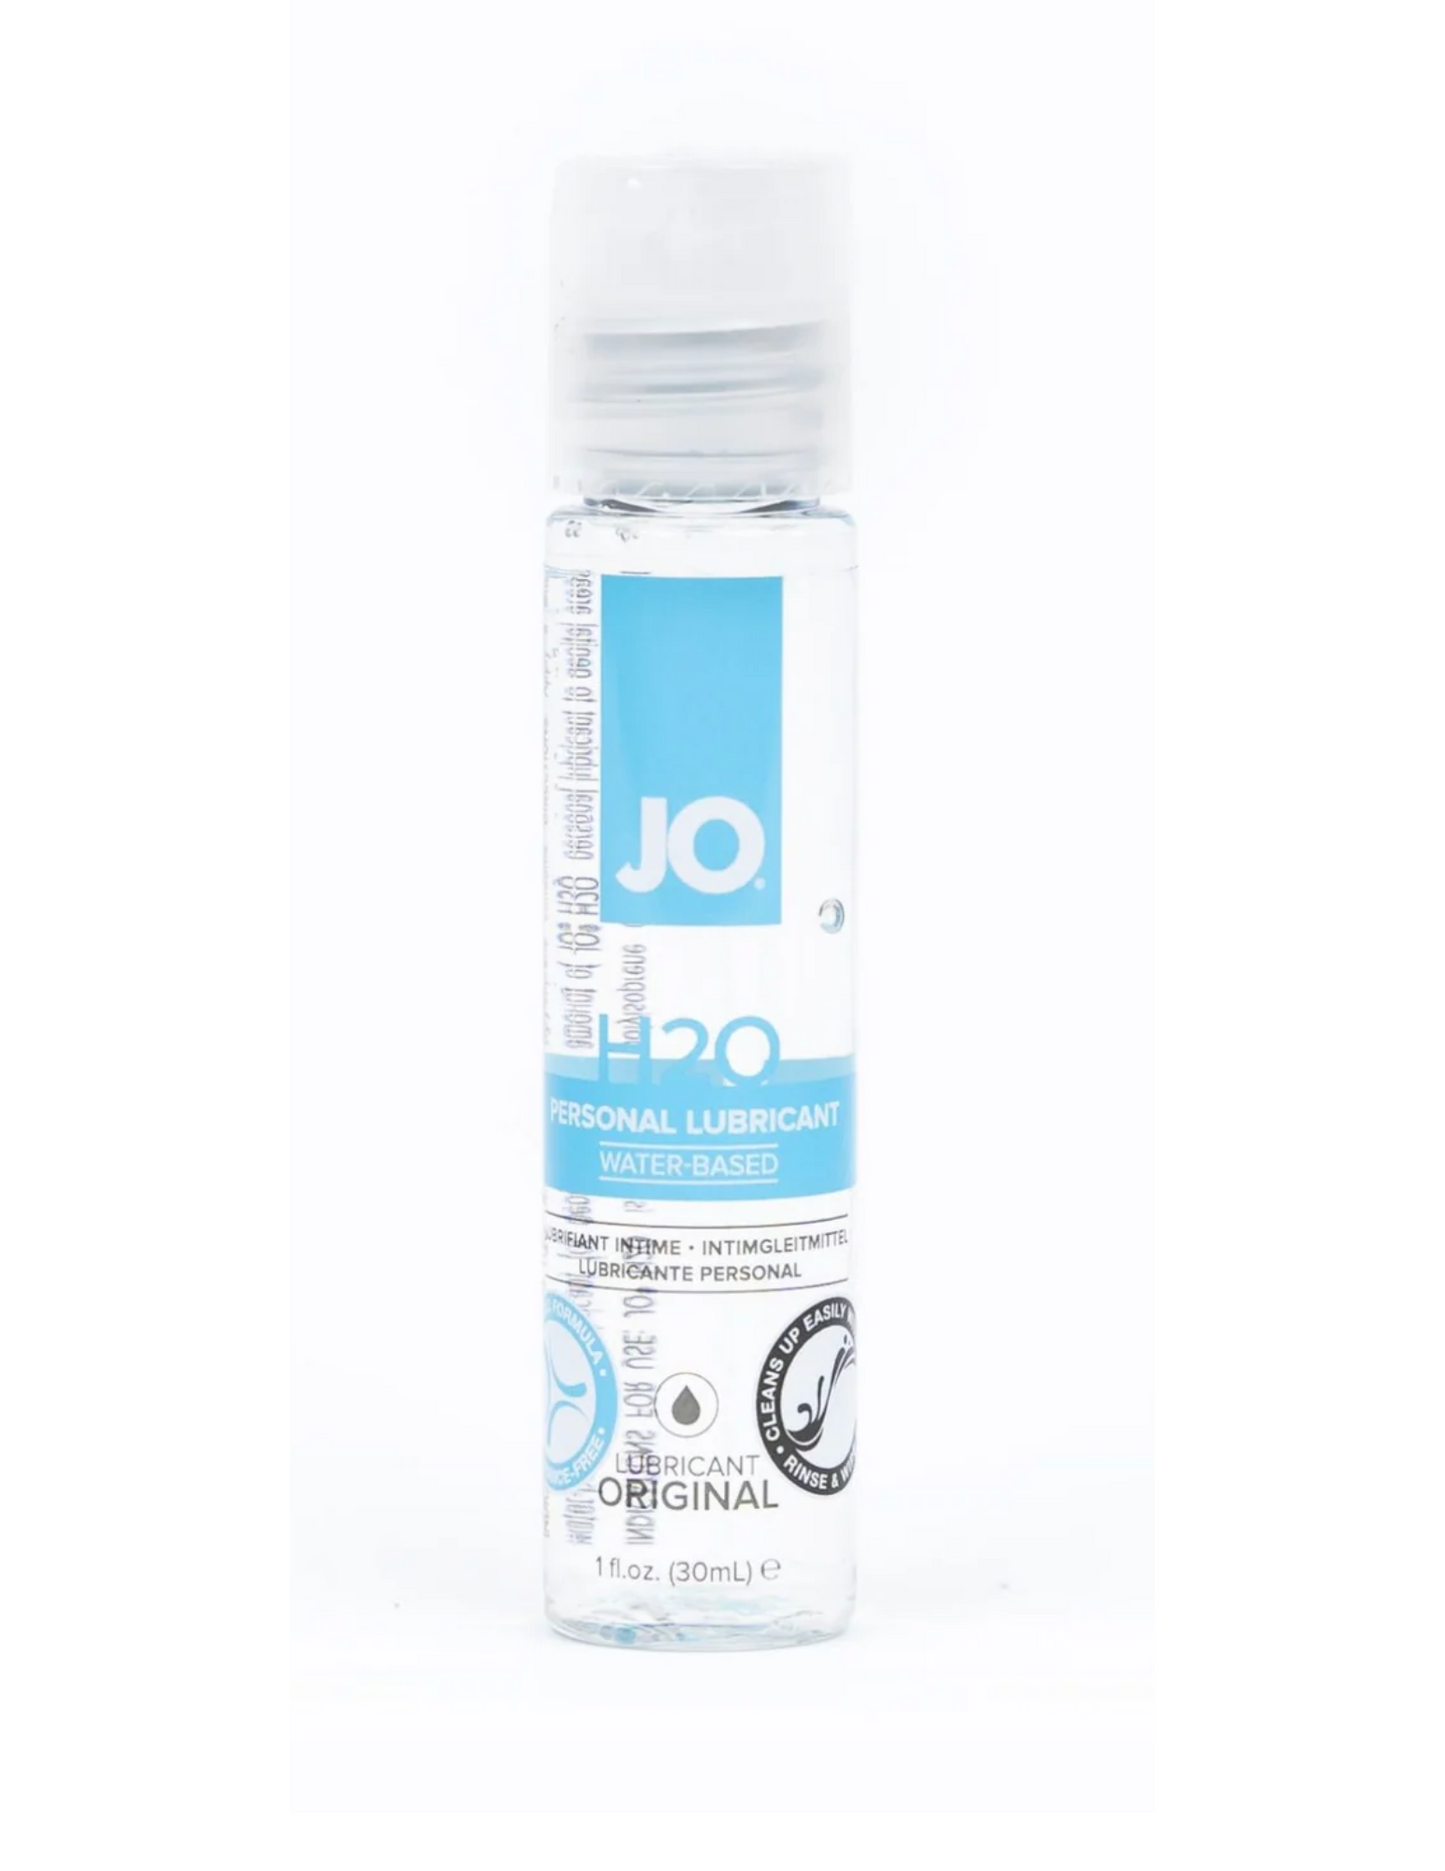 Front of the bottle of water-based lubricant by System JO, 1oz.